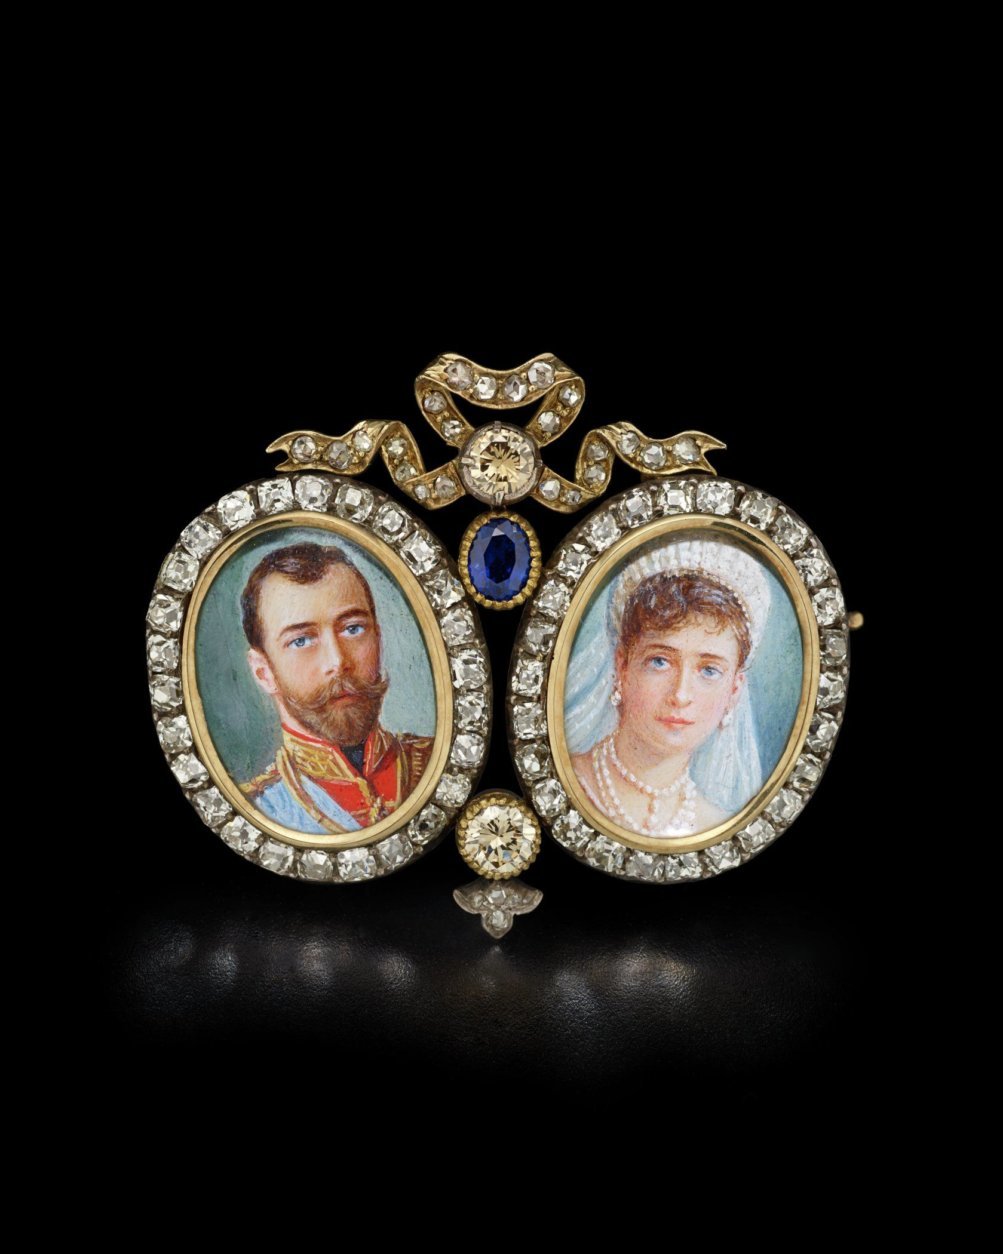 Brooch with Miniatures of Nicholas II and Alexandra, Fabergé, St. Petersburg, 1899-1903. Hillwood Estate, Museum & Gardens, acc. no. 11.241. Photographed by Alex Braun.